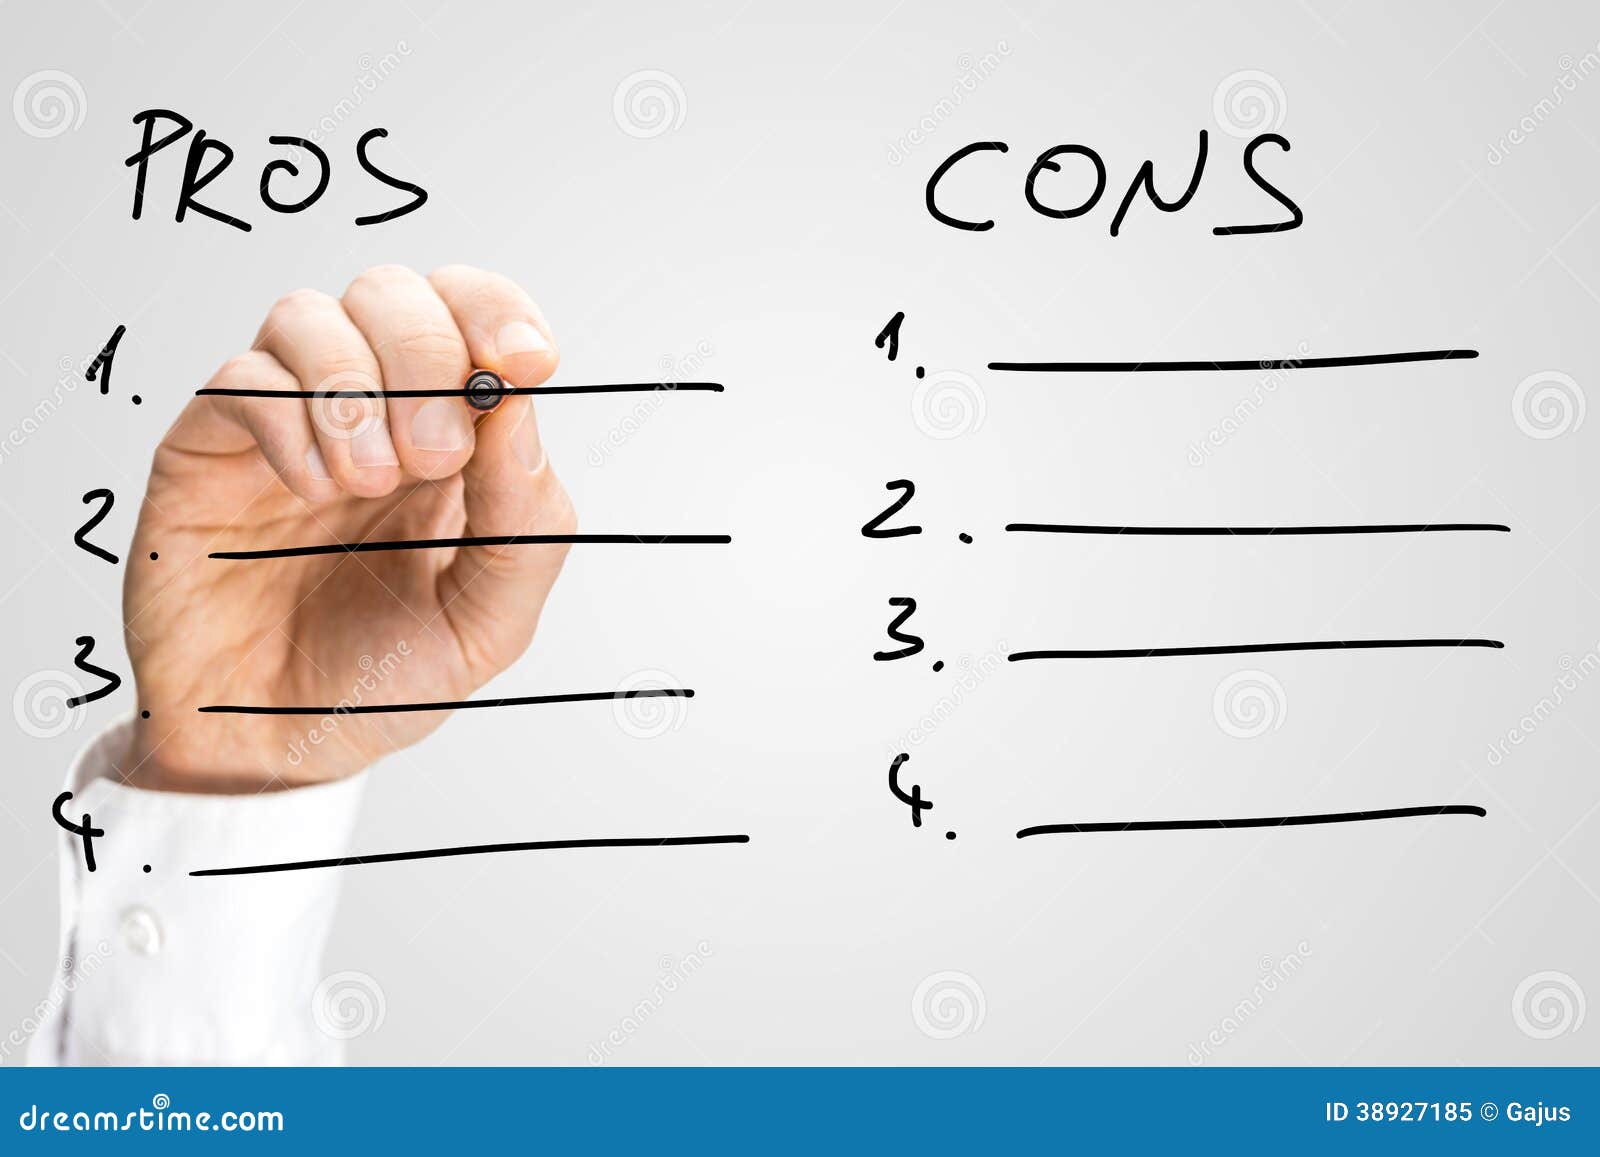 man drawing up a list of pros and cons